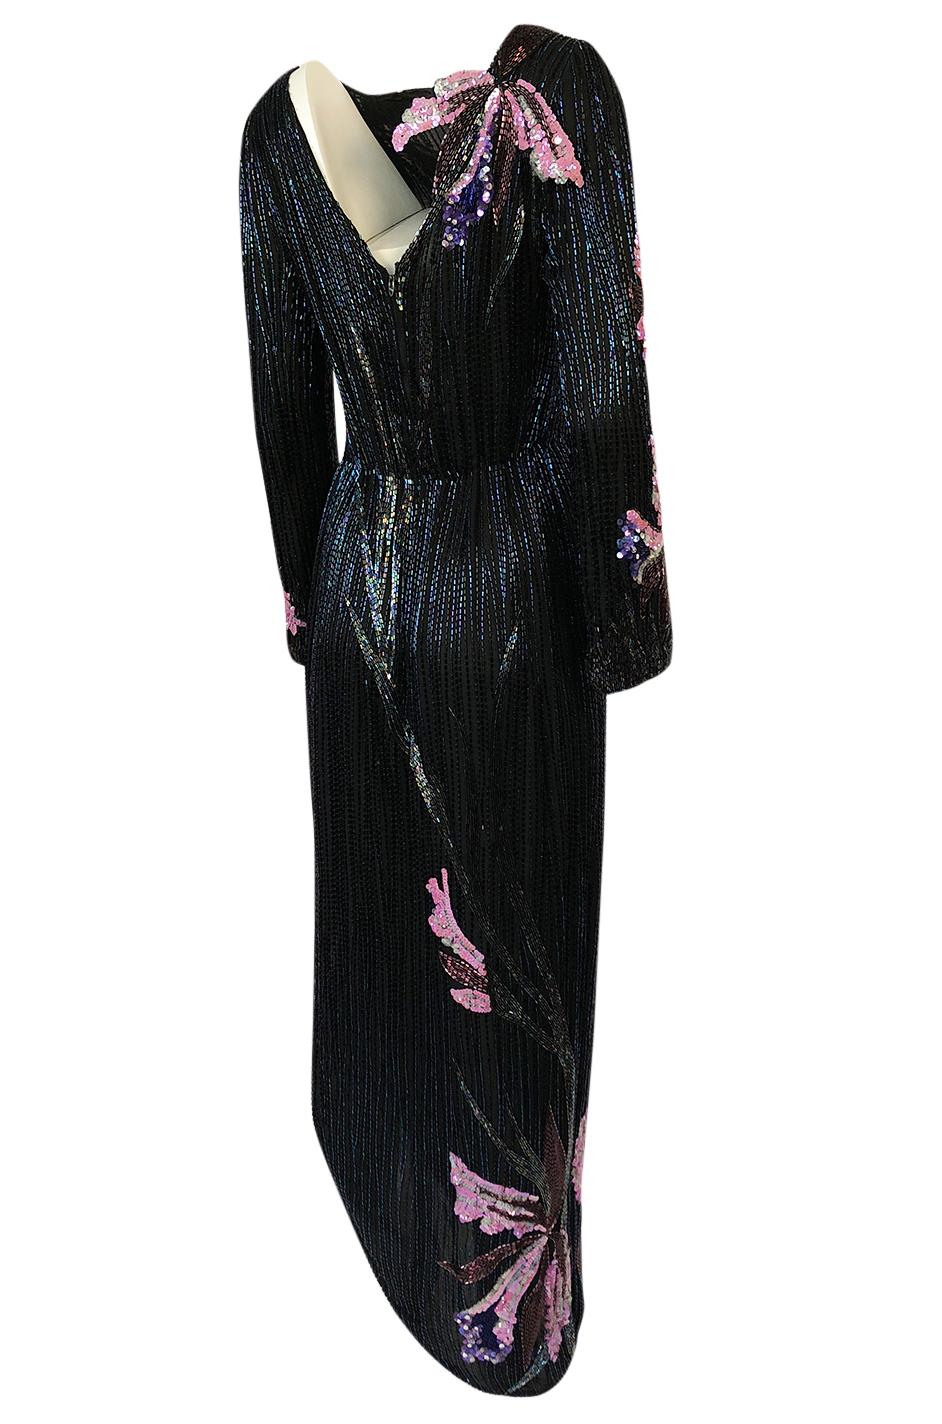 This stunning and rare gown was designed by Bob Mackie. Mackie was best known for dressing Cher and for his undying love of opulence and bead work, both of which he incorporates heavily into the best of his designs. He worked for both Edith Head and